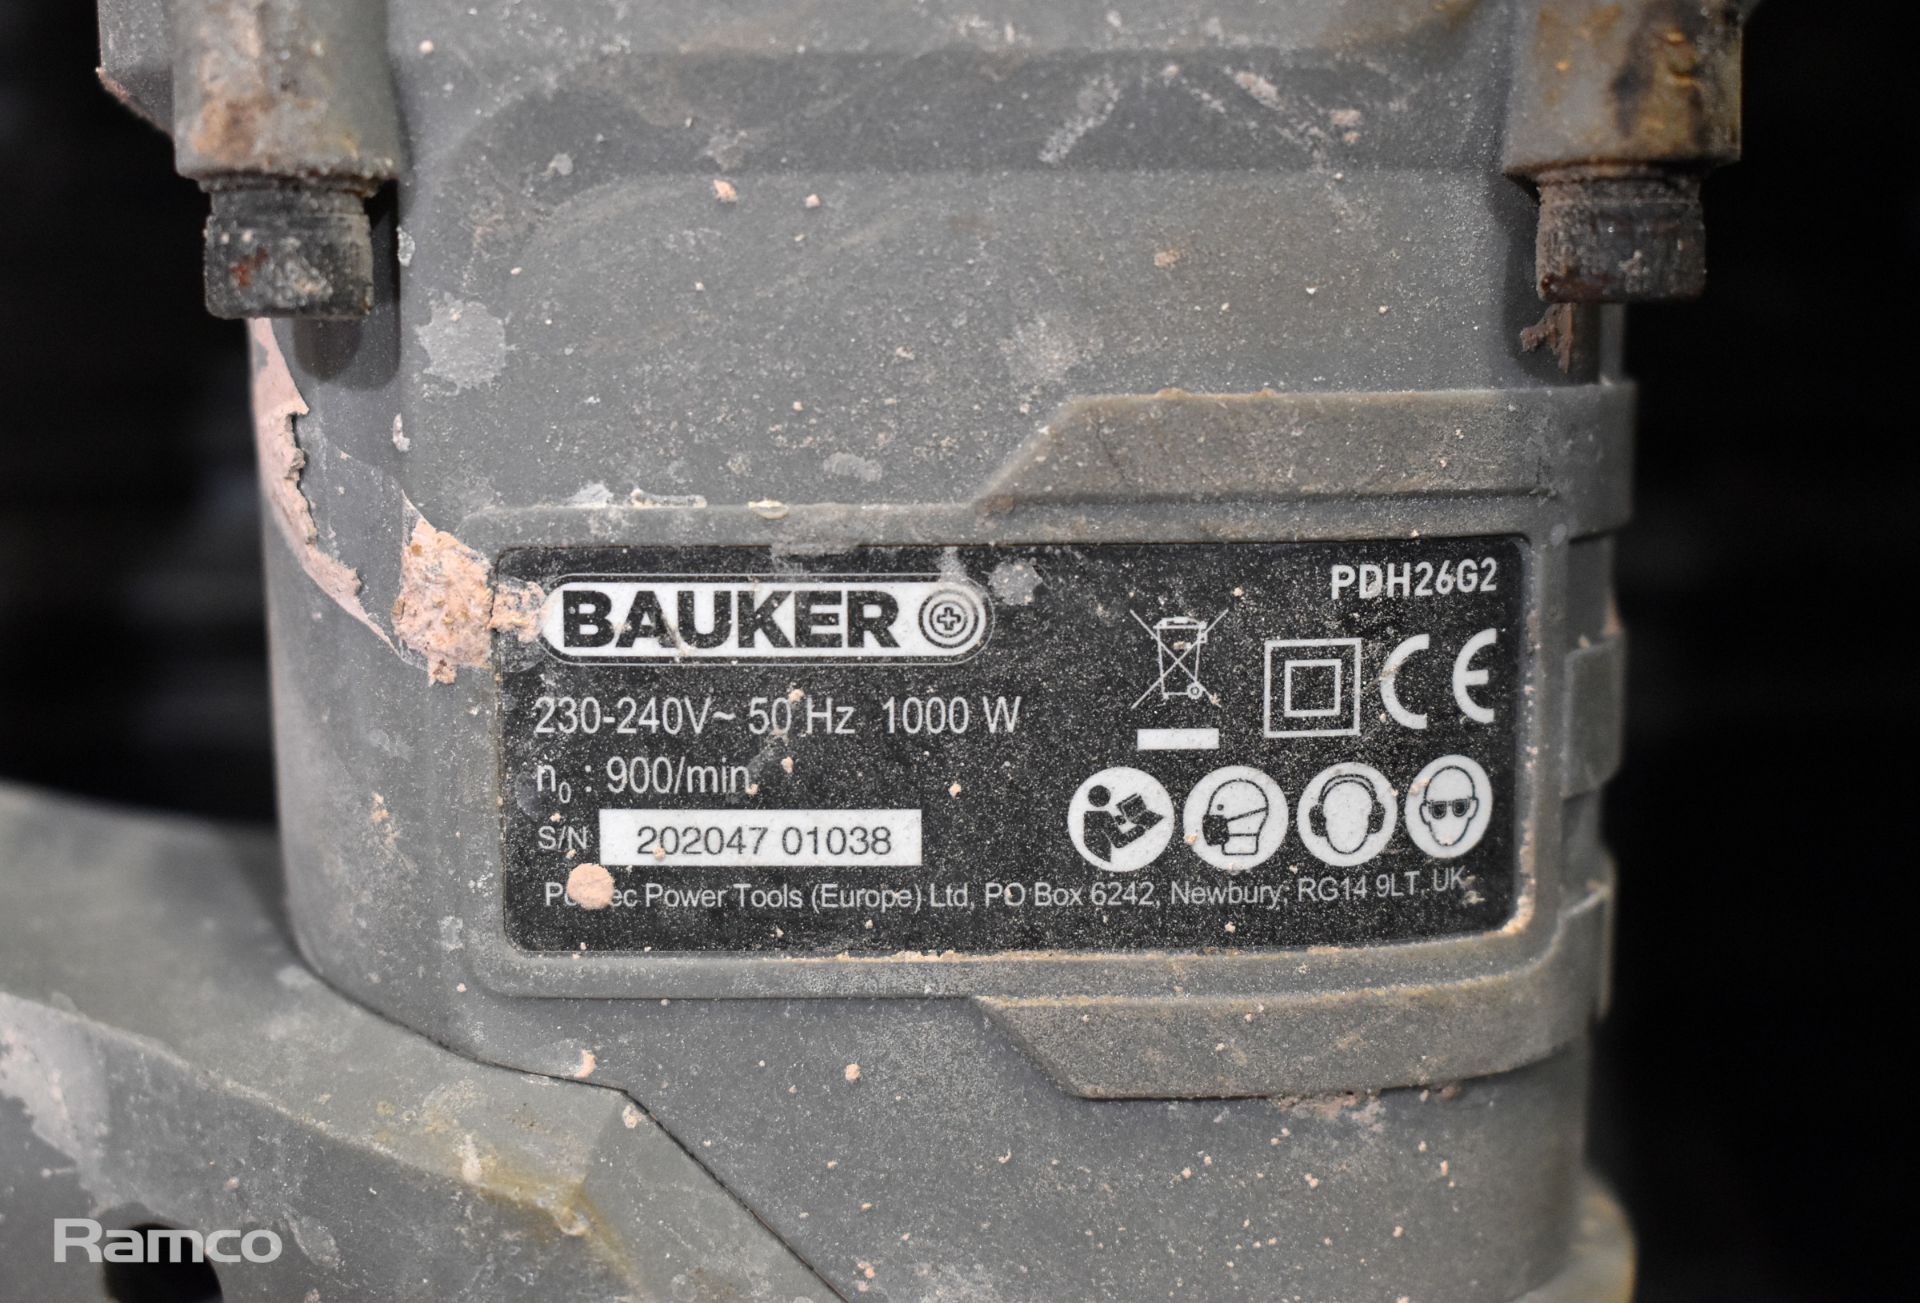 2x Bauker 1000 W hammer drills with case - Image 4 of 10